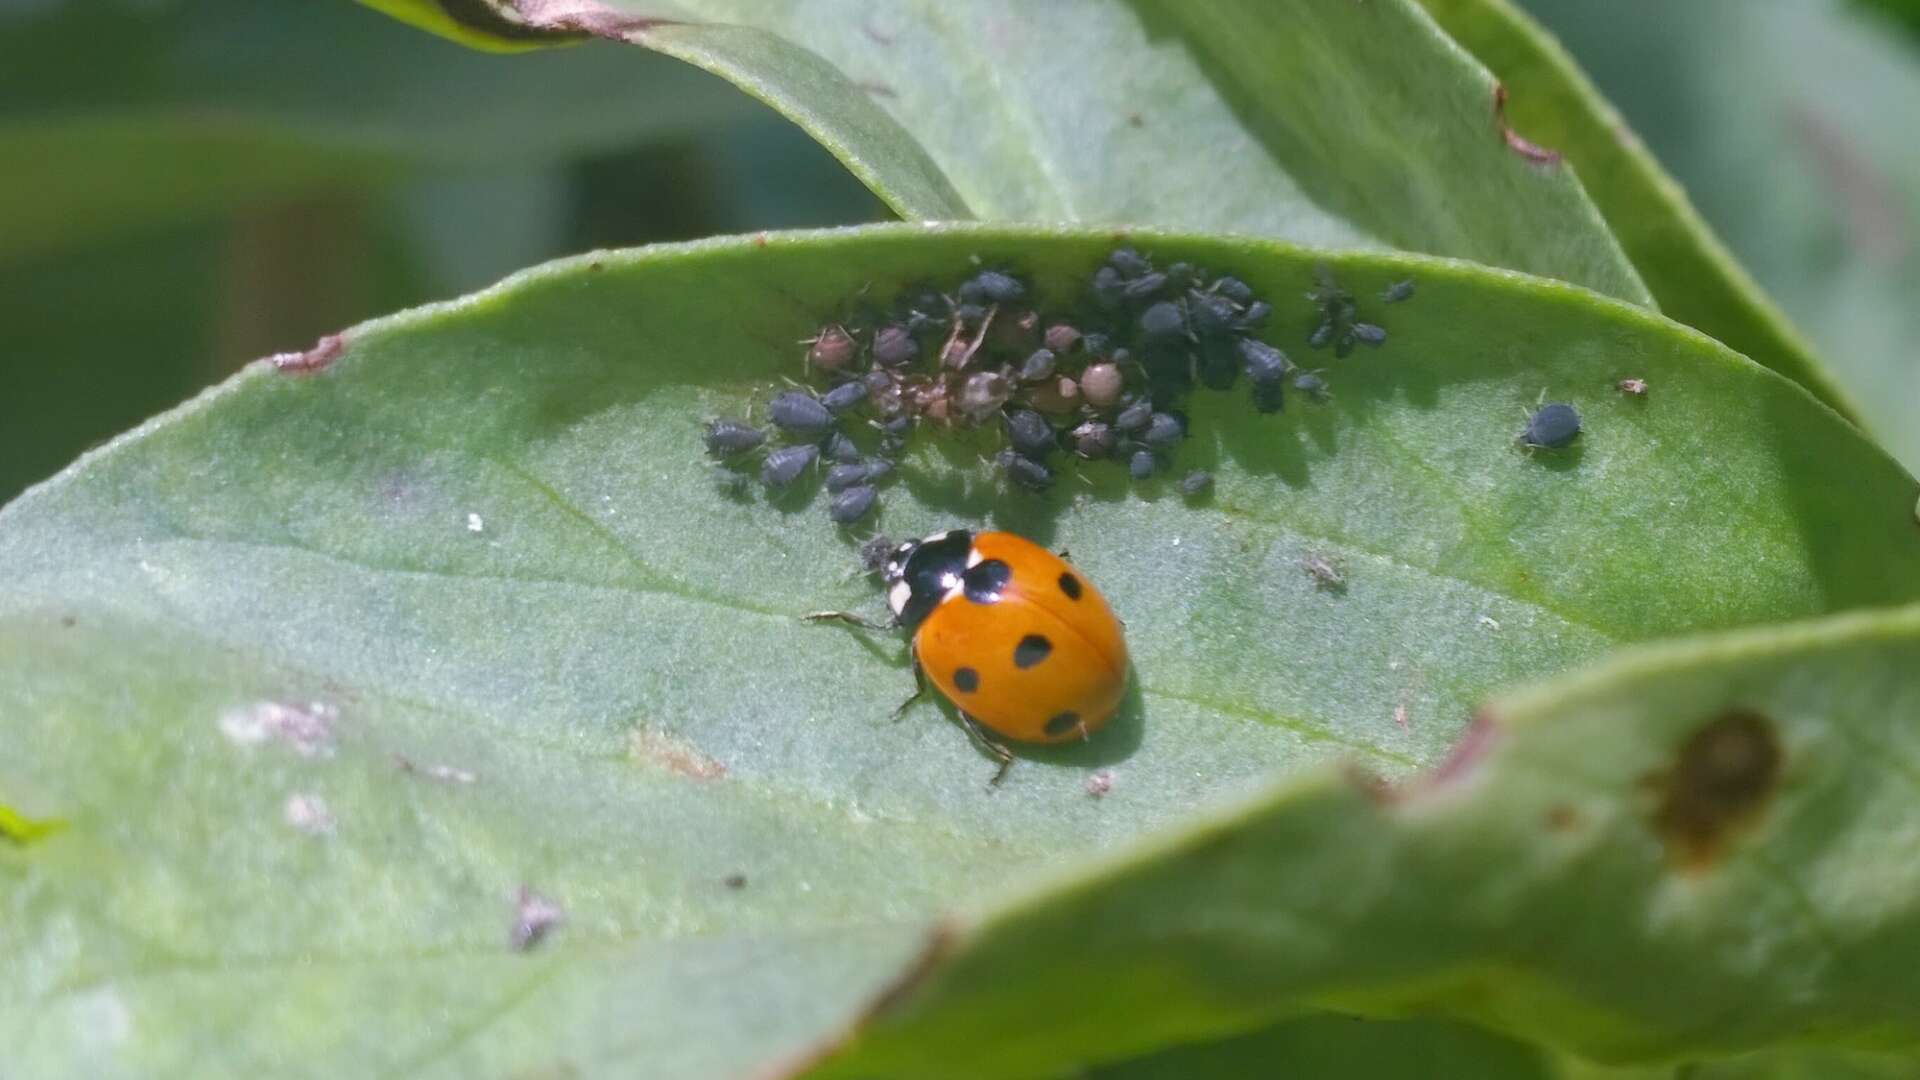 Ladybird eating black aphids